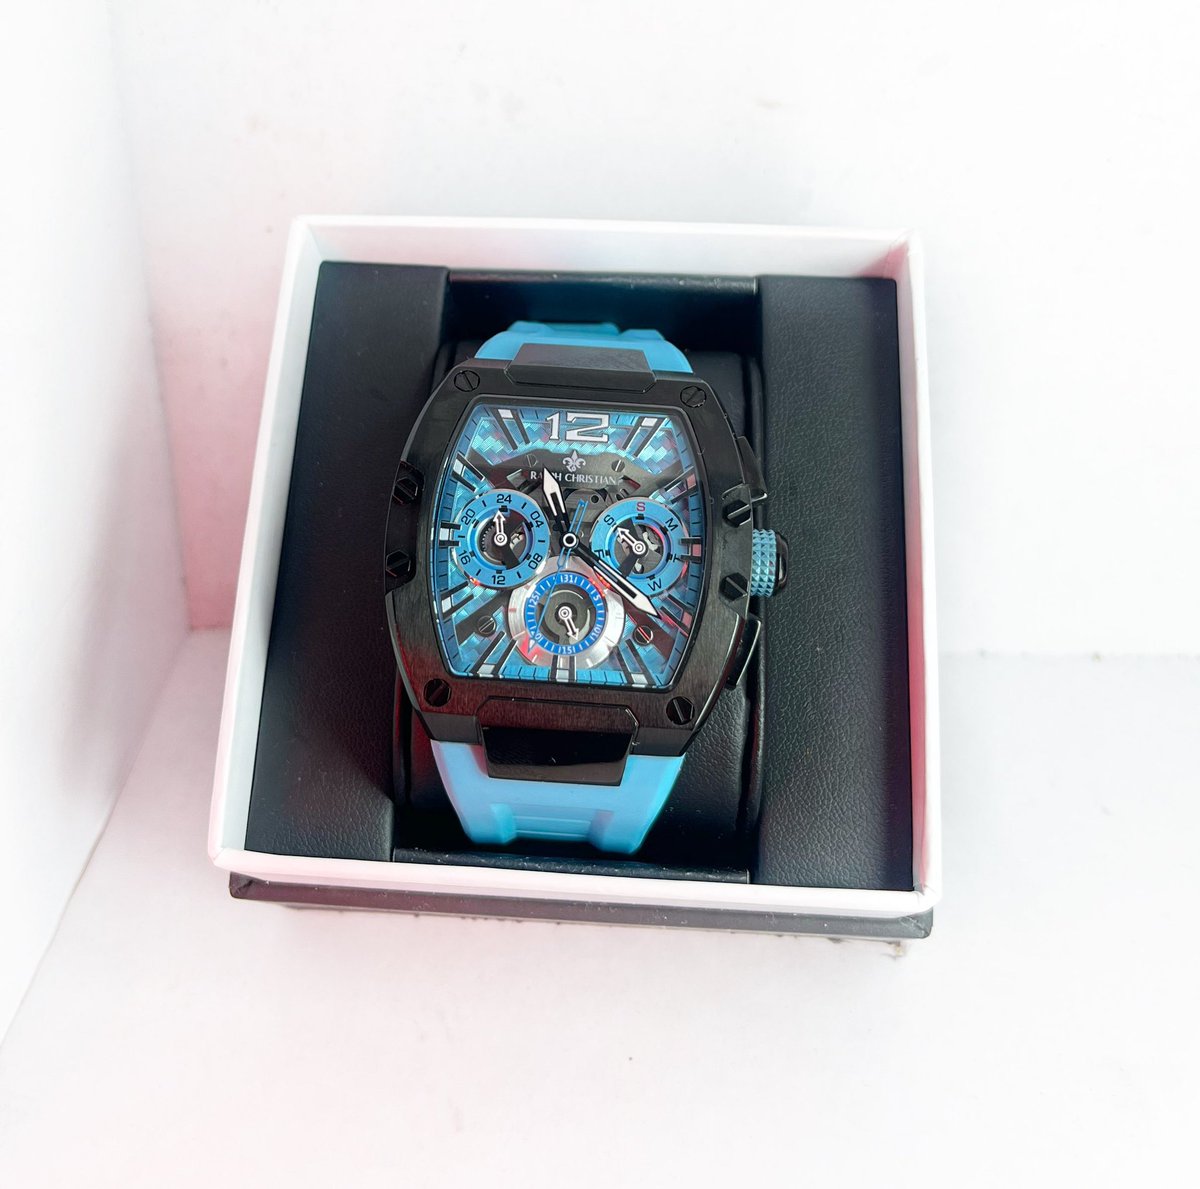 Ralph Christian Intrepid. Artic Blue. Pre-owned ( worn only once ) In pristine condition. Comes with box and papers. Available to be delivered instantly. N310,000.